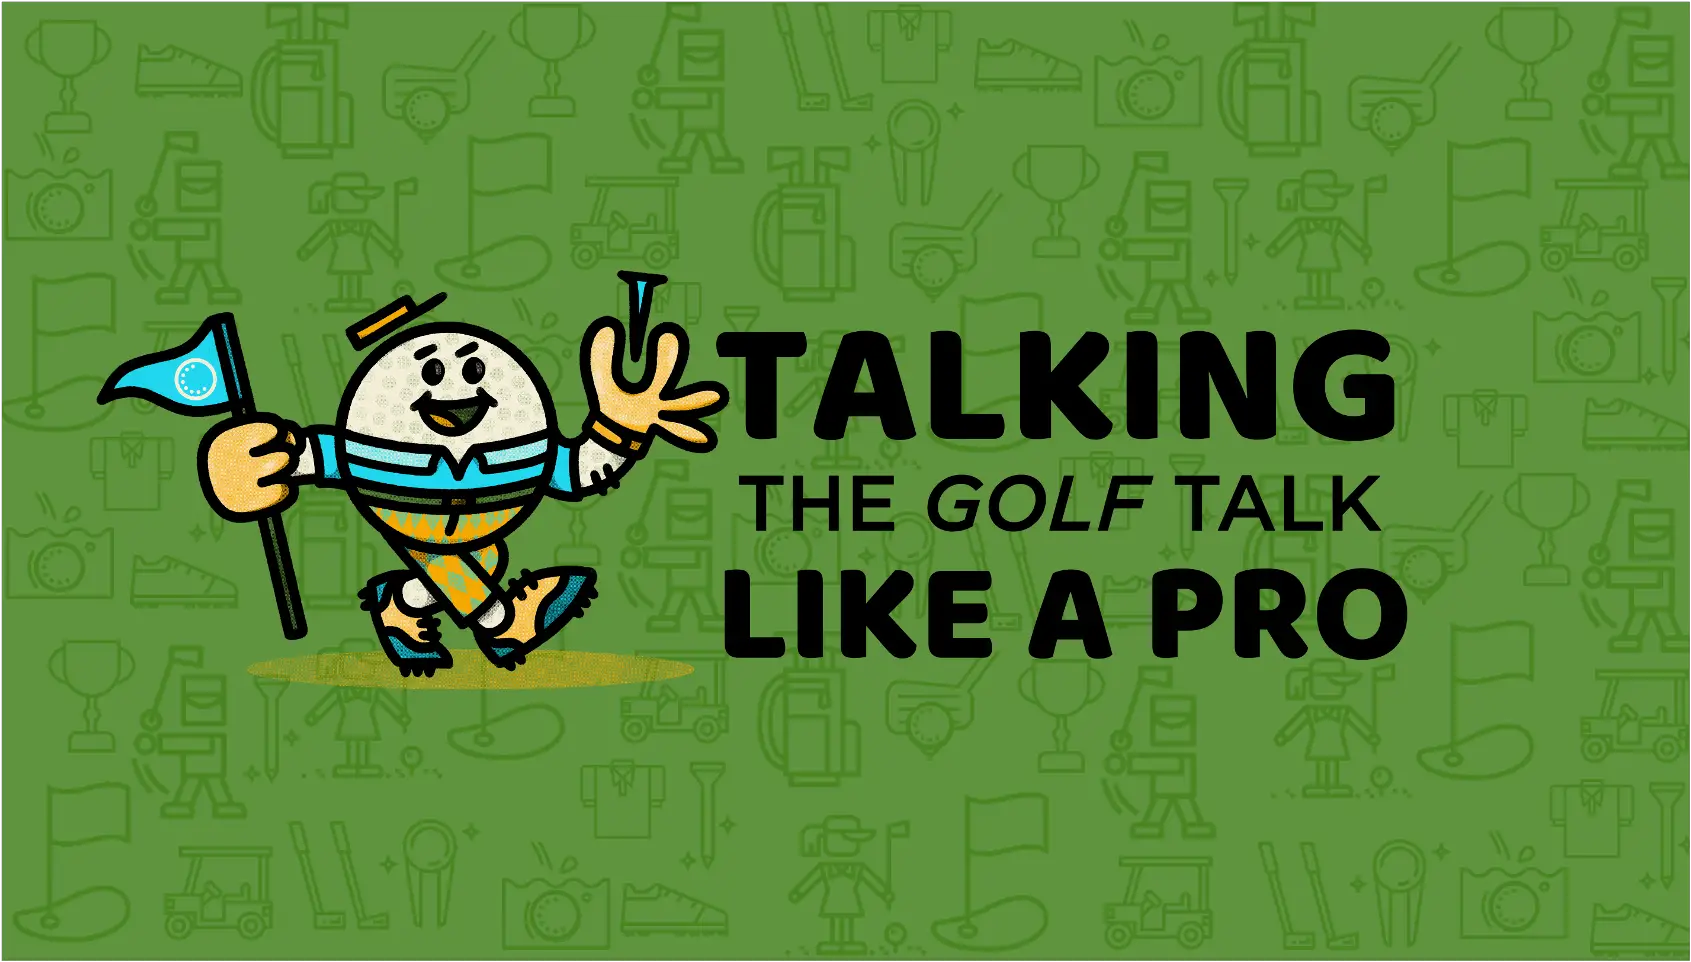 10 Golf Terms that’ll have you Talking Like a Pro While you’re Chasing Par